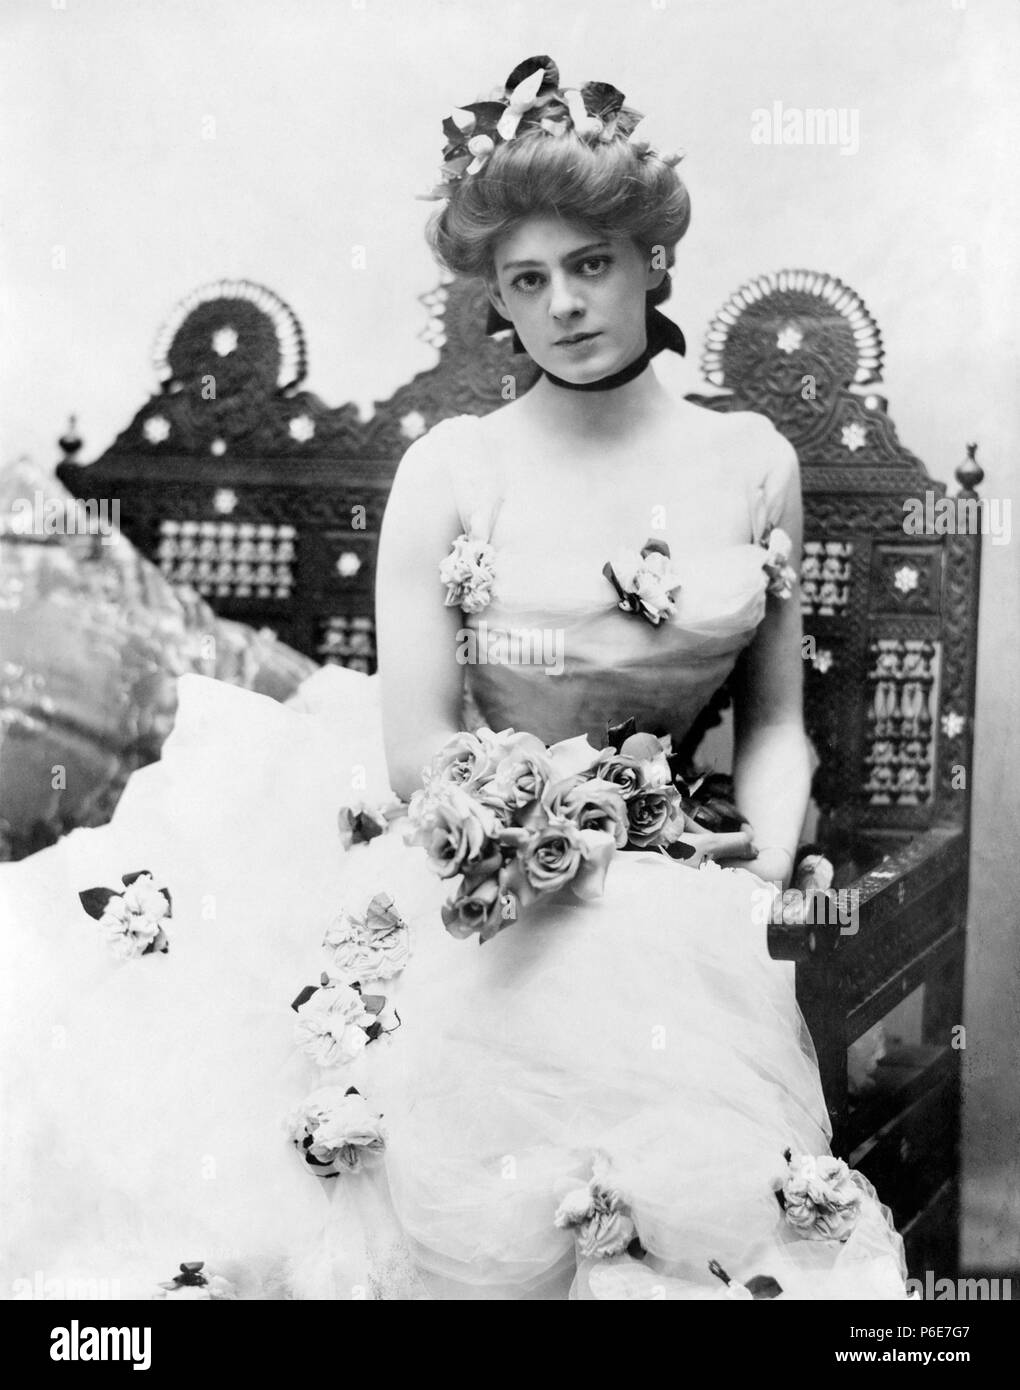 BARRYMORE, ETHEL. Photograph by Burr McIntosh, N.Y. Copyrighted 1901. Location: Biographical File Reproduction Number: LC-USZ62-107369. Copyrighted 1901 42 EthelBarrymore1901 Stock Photo